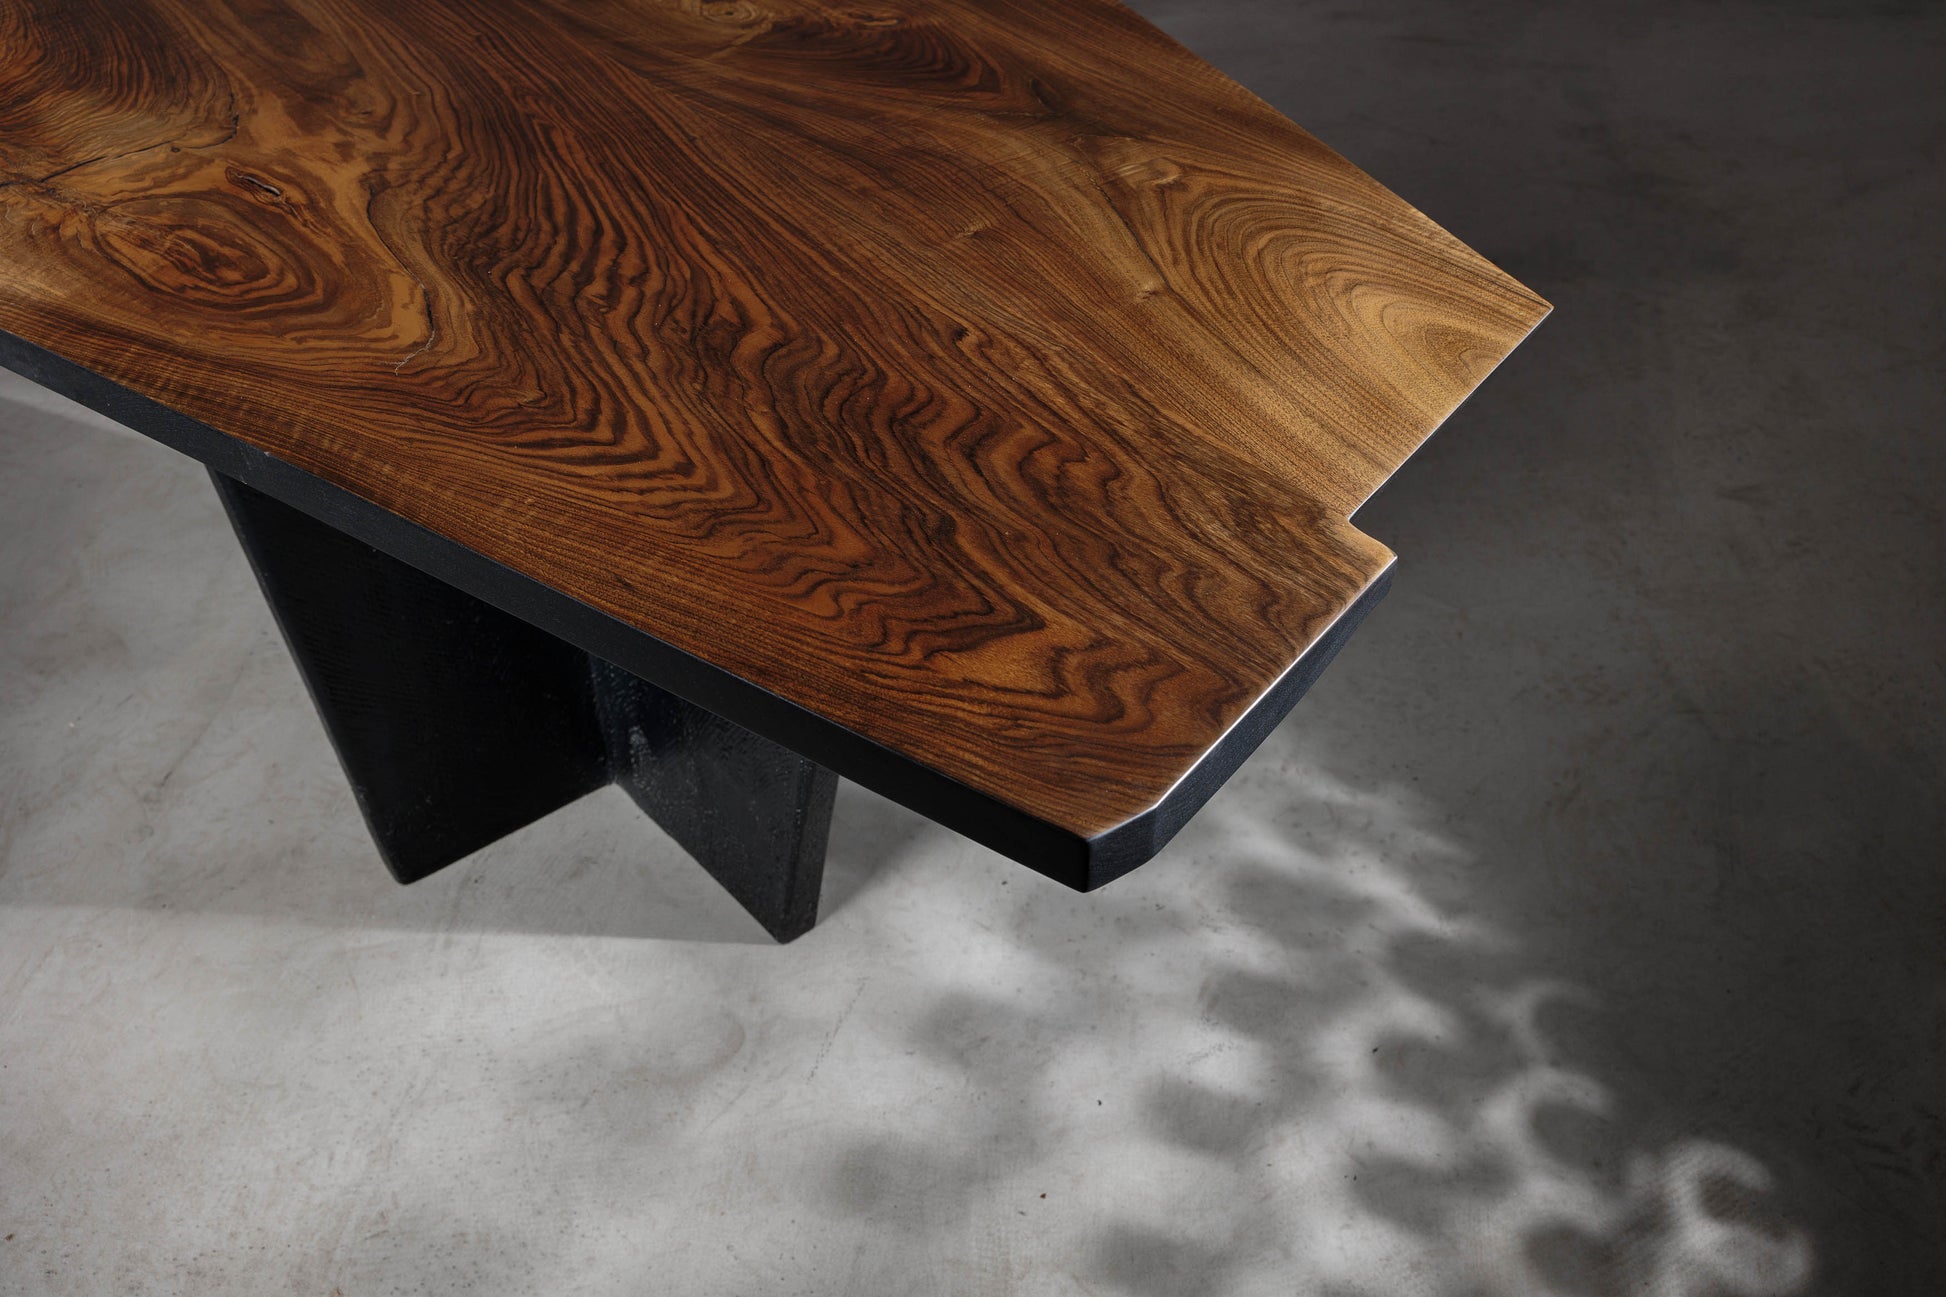 EM205 Of 18Brut Collection | Walnut Dining Table For 4 | Image from above showcasing the beautiful walnut burl.